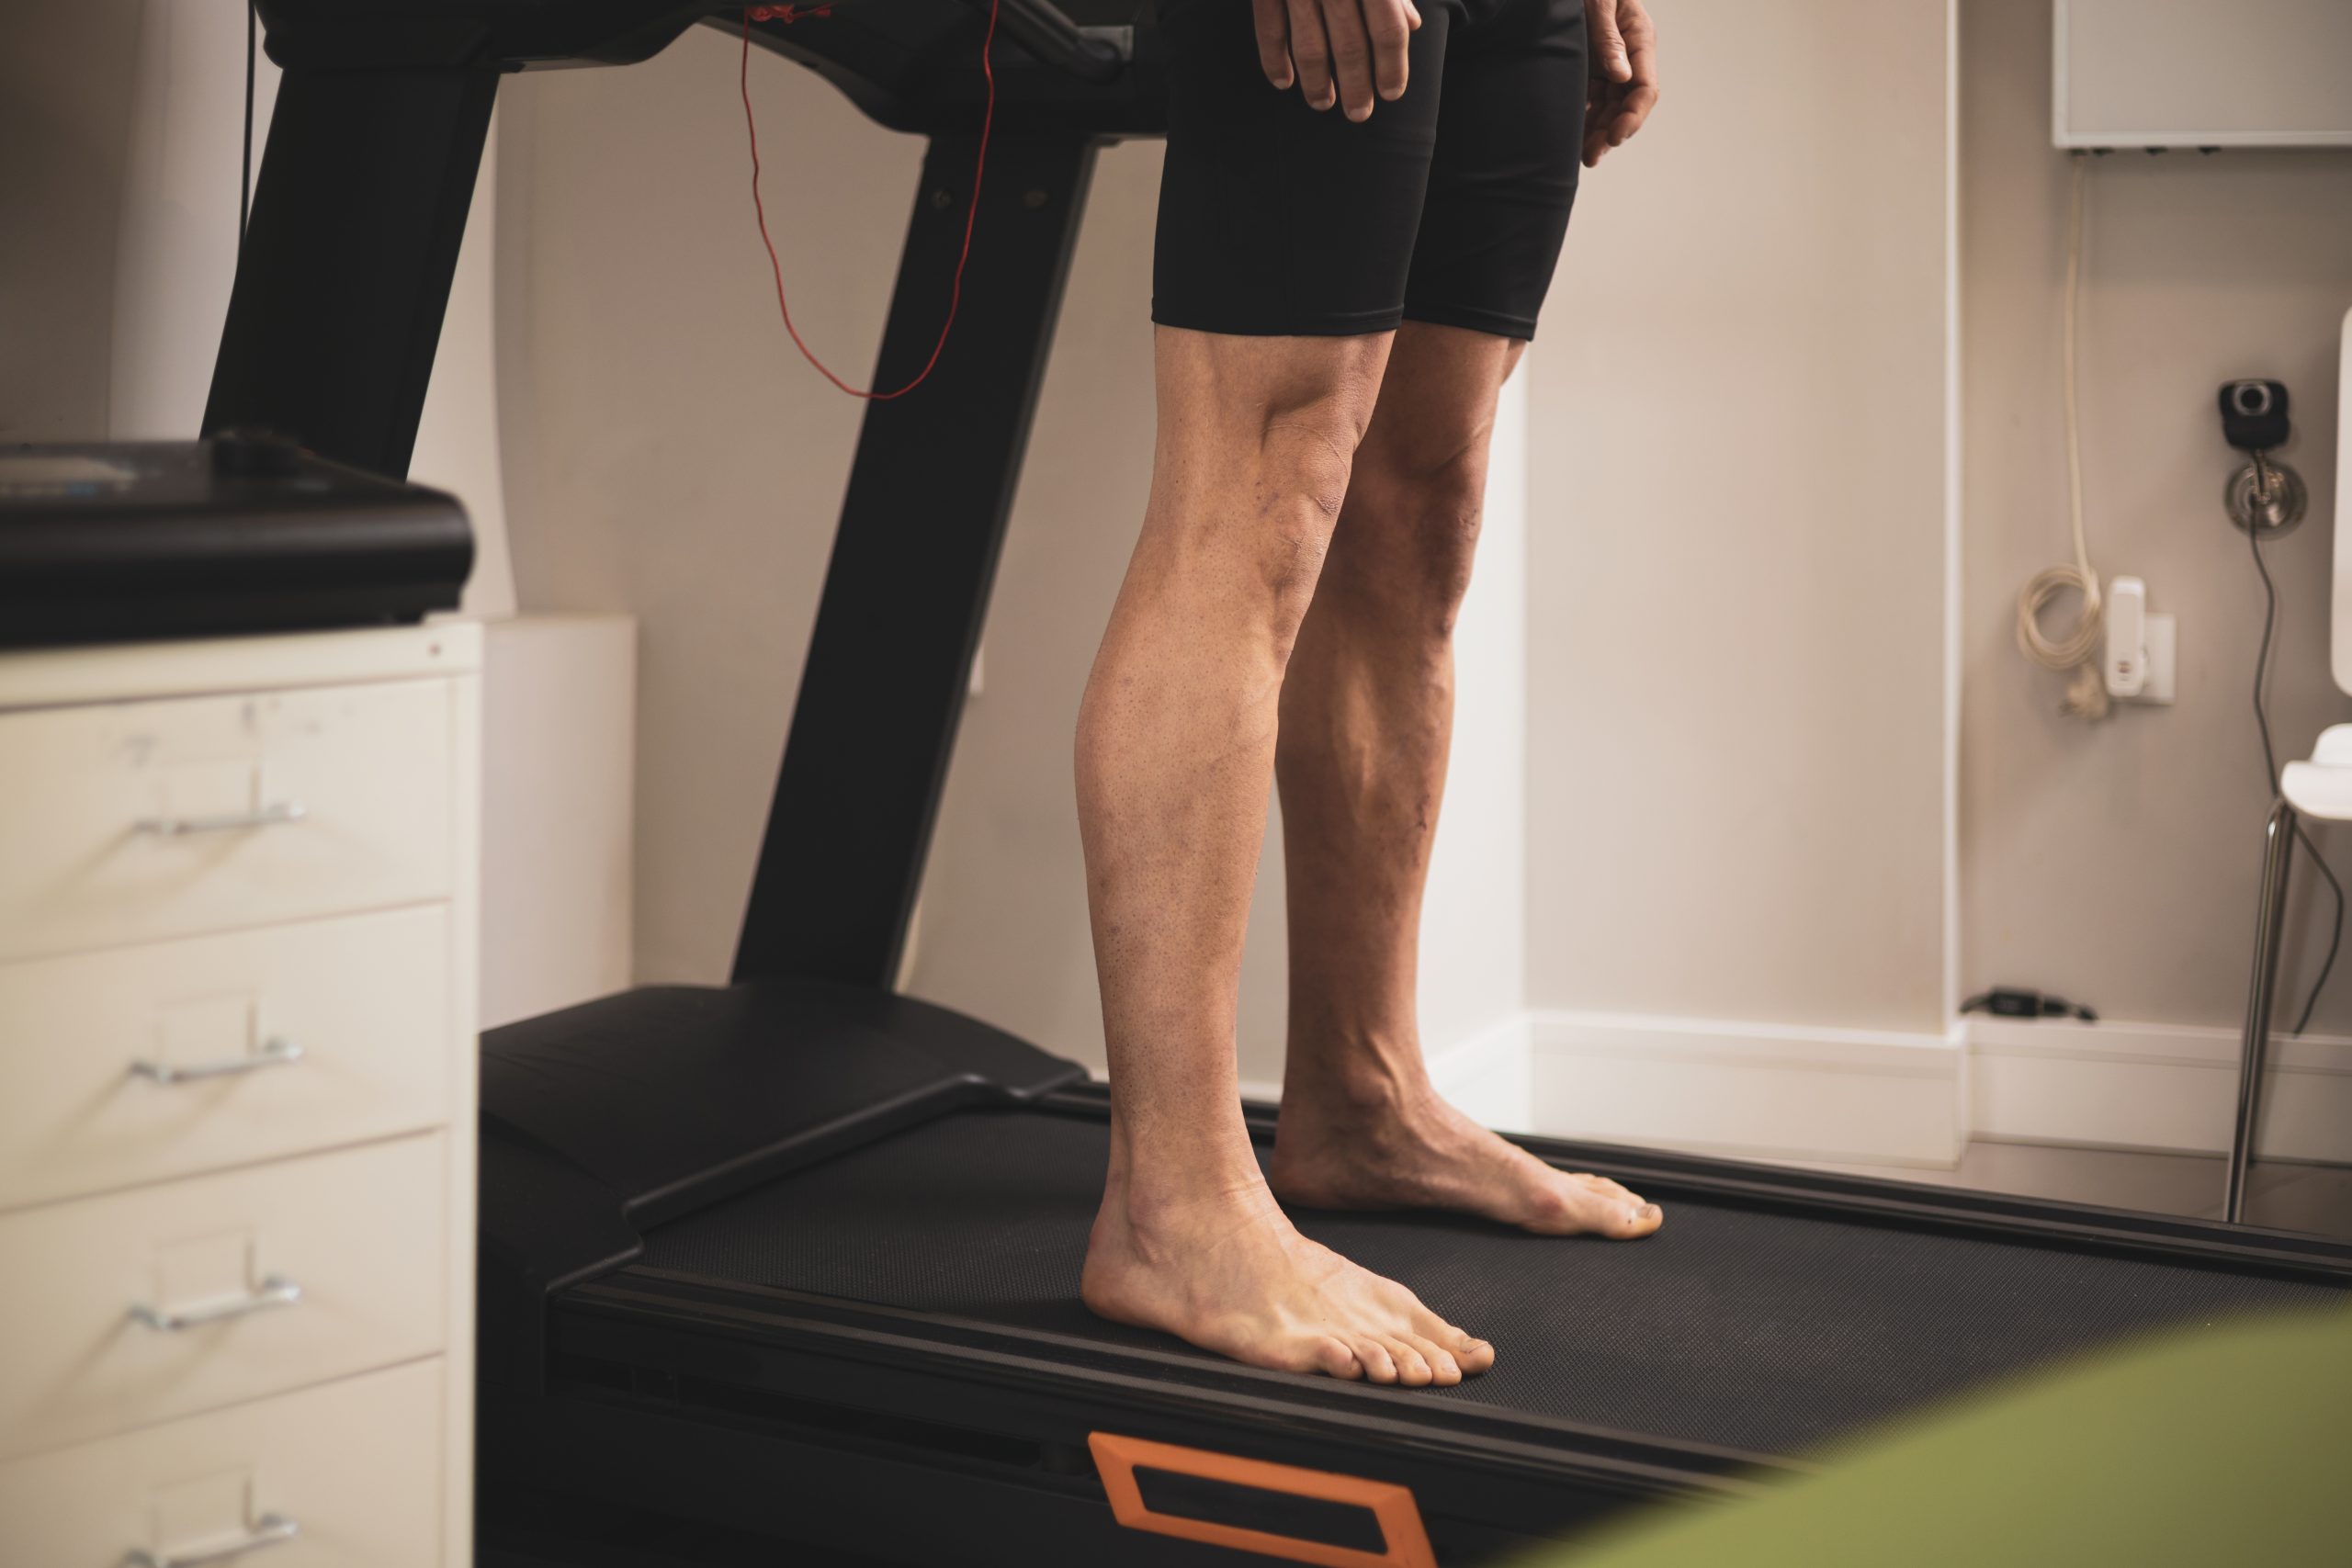 Why is a biomechanical examination important?